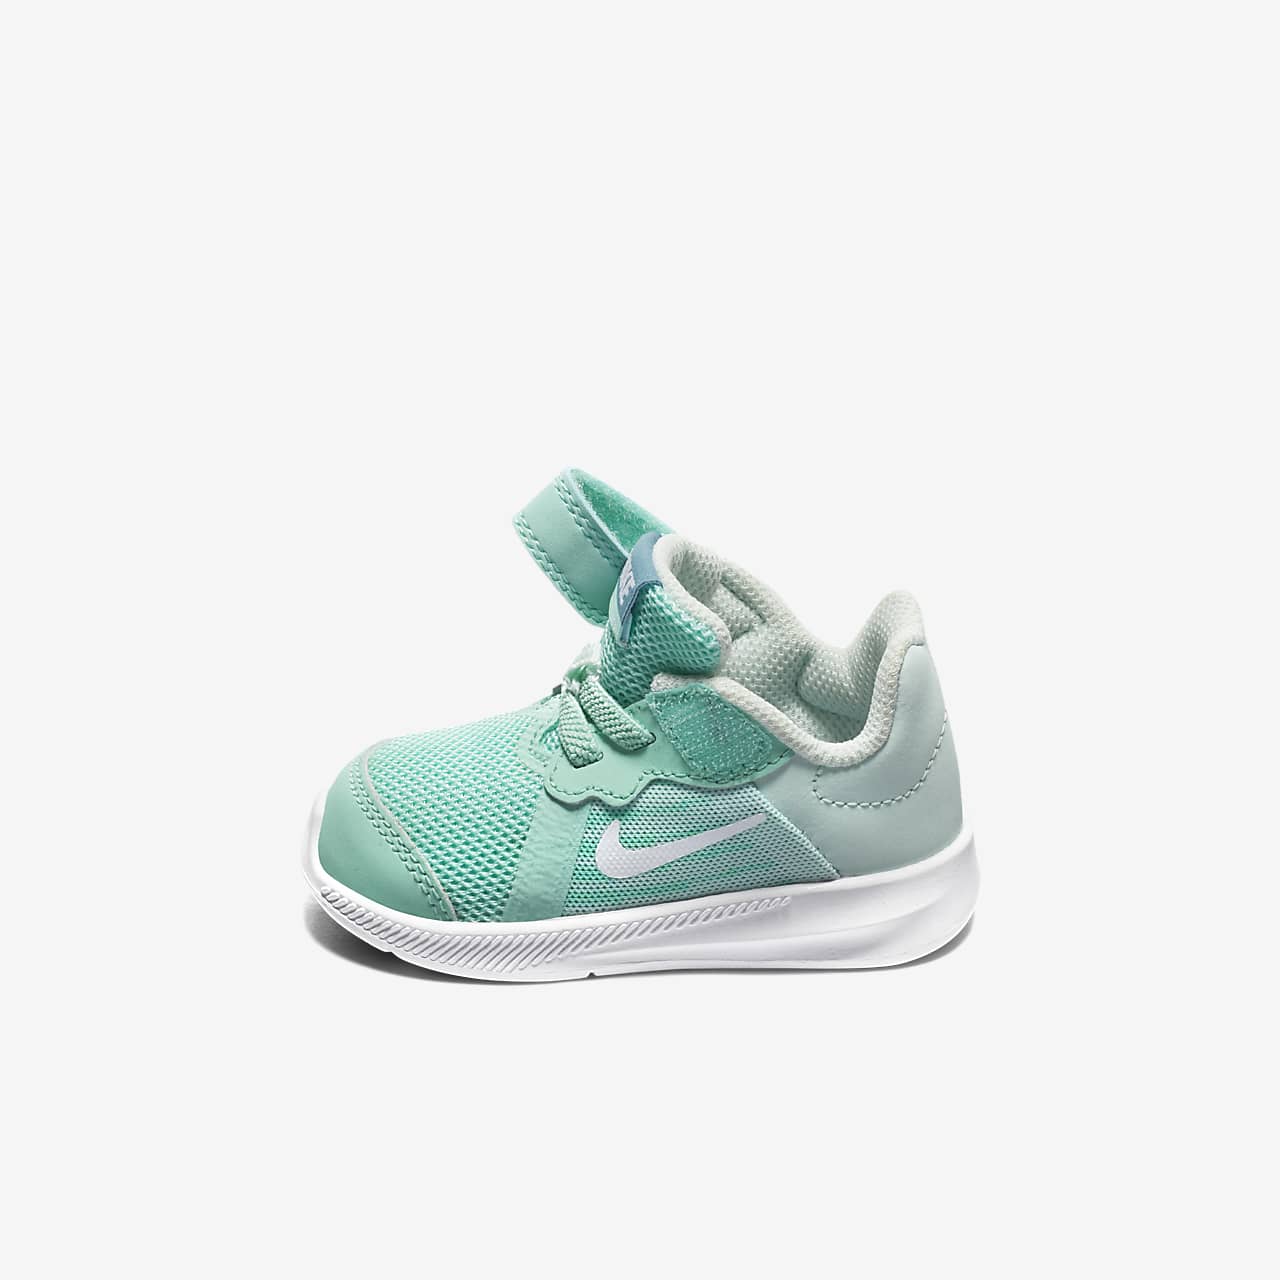 Nike Downshifter Baby, Buy Now, Hot 56% OFF,